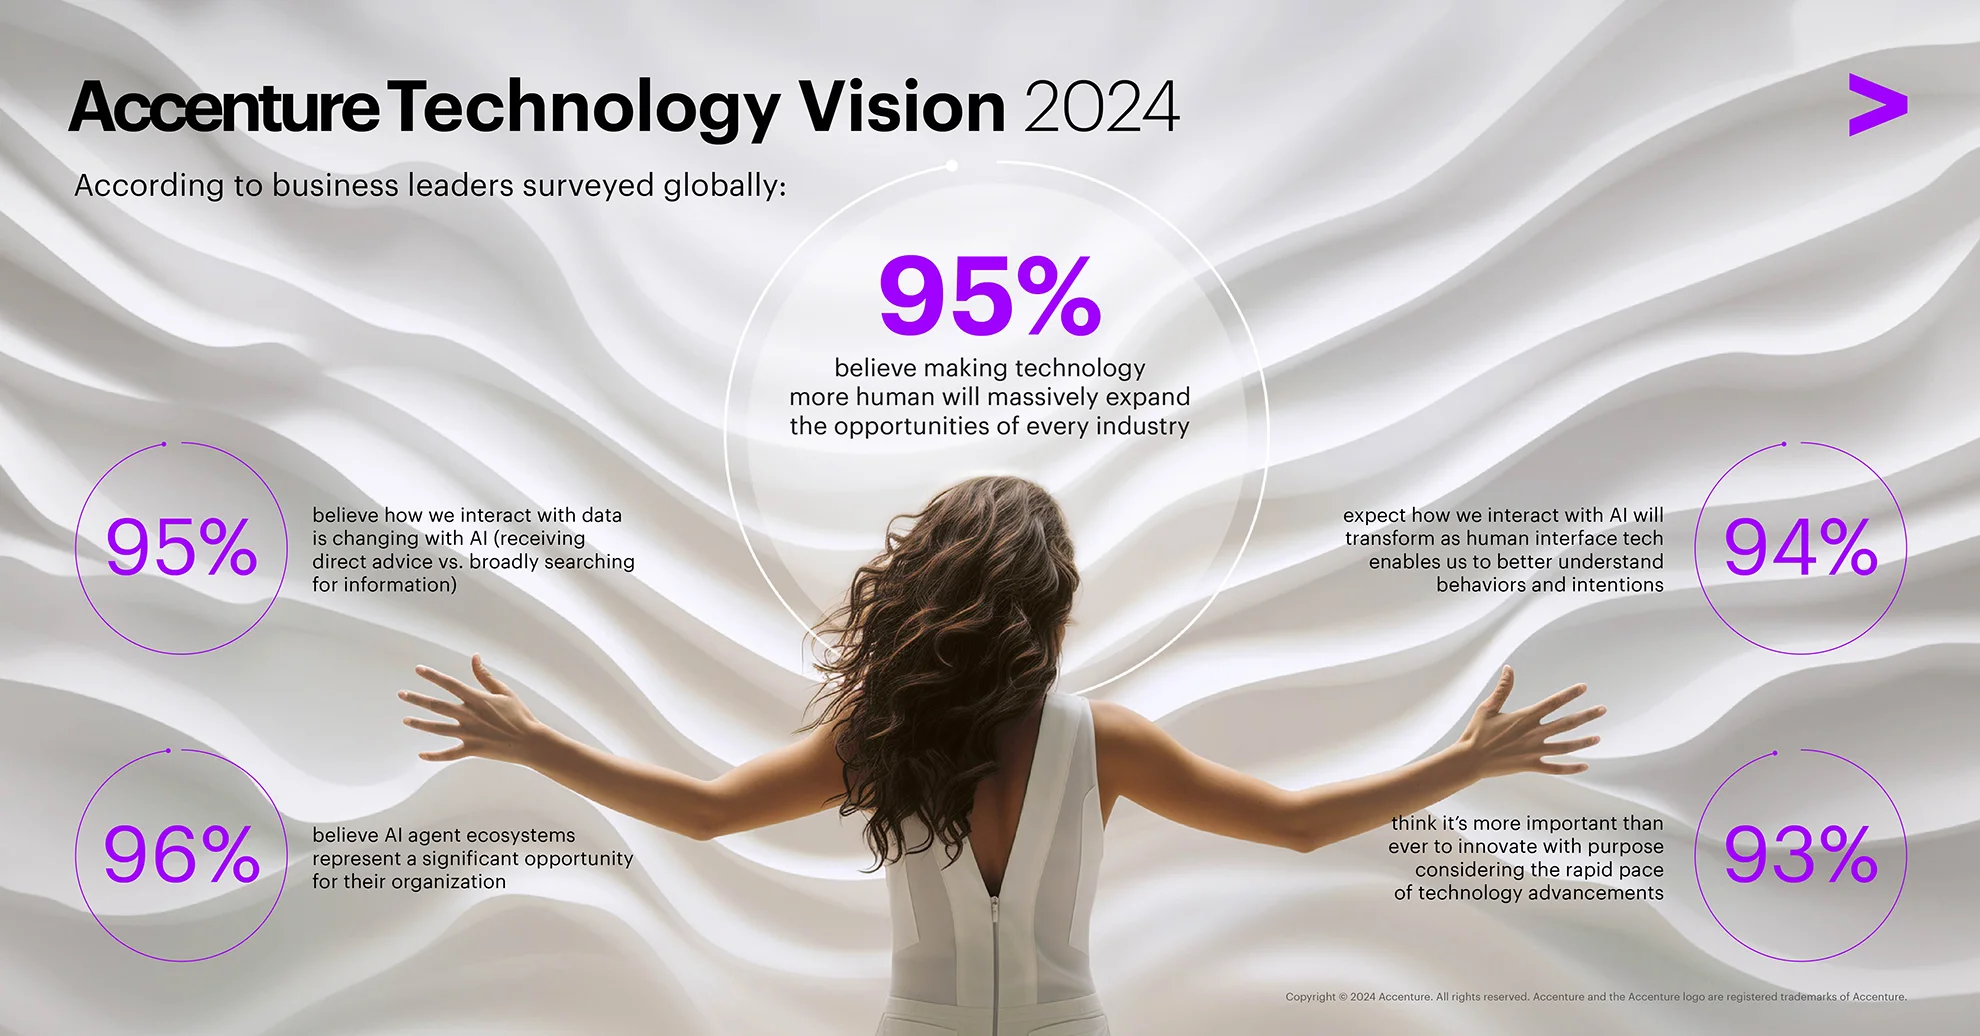 Accenture Technology Vision 2024 Infographic 0965d